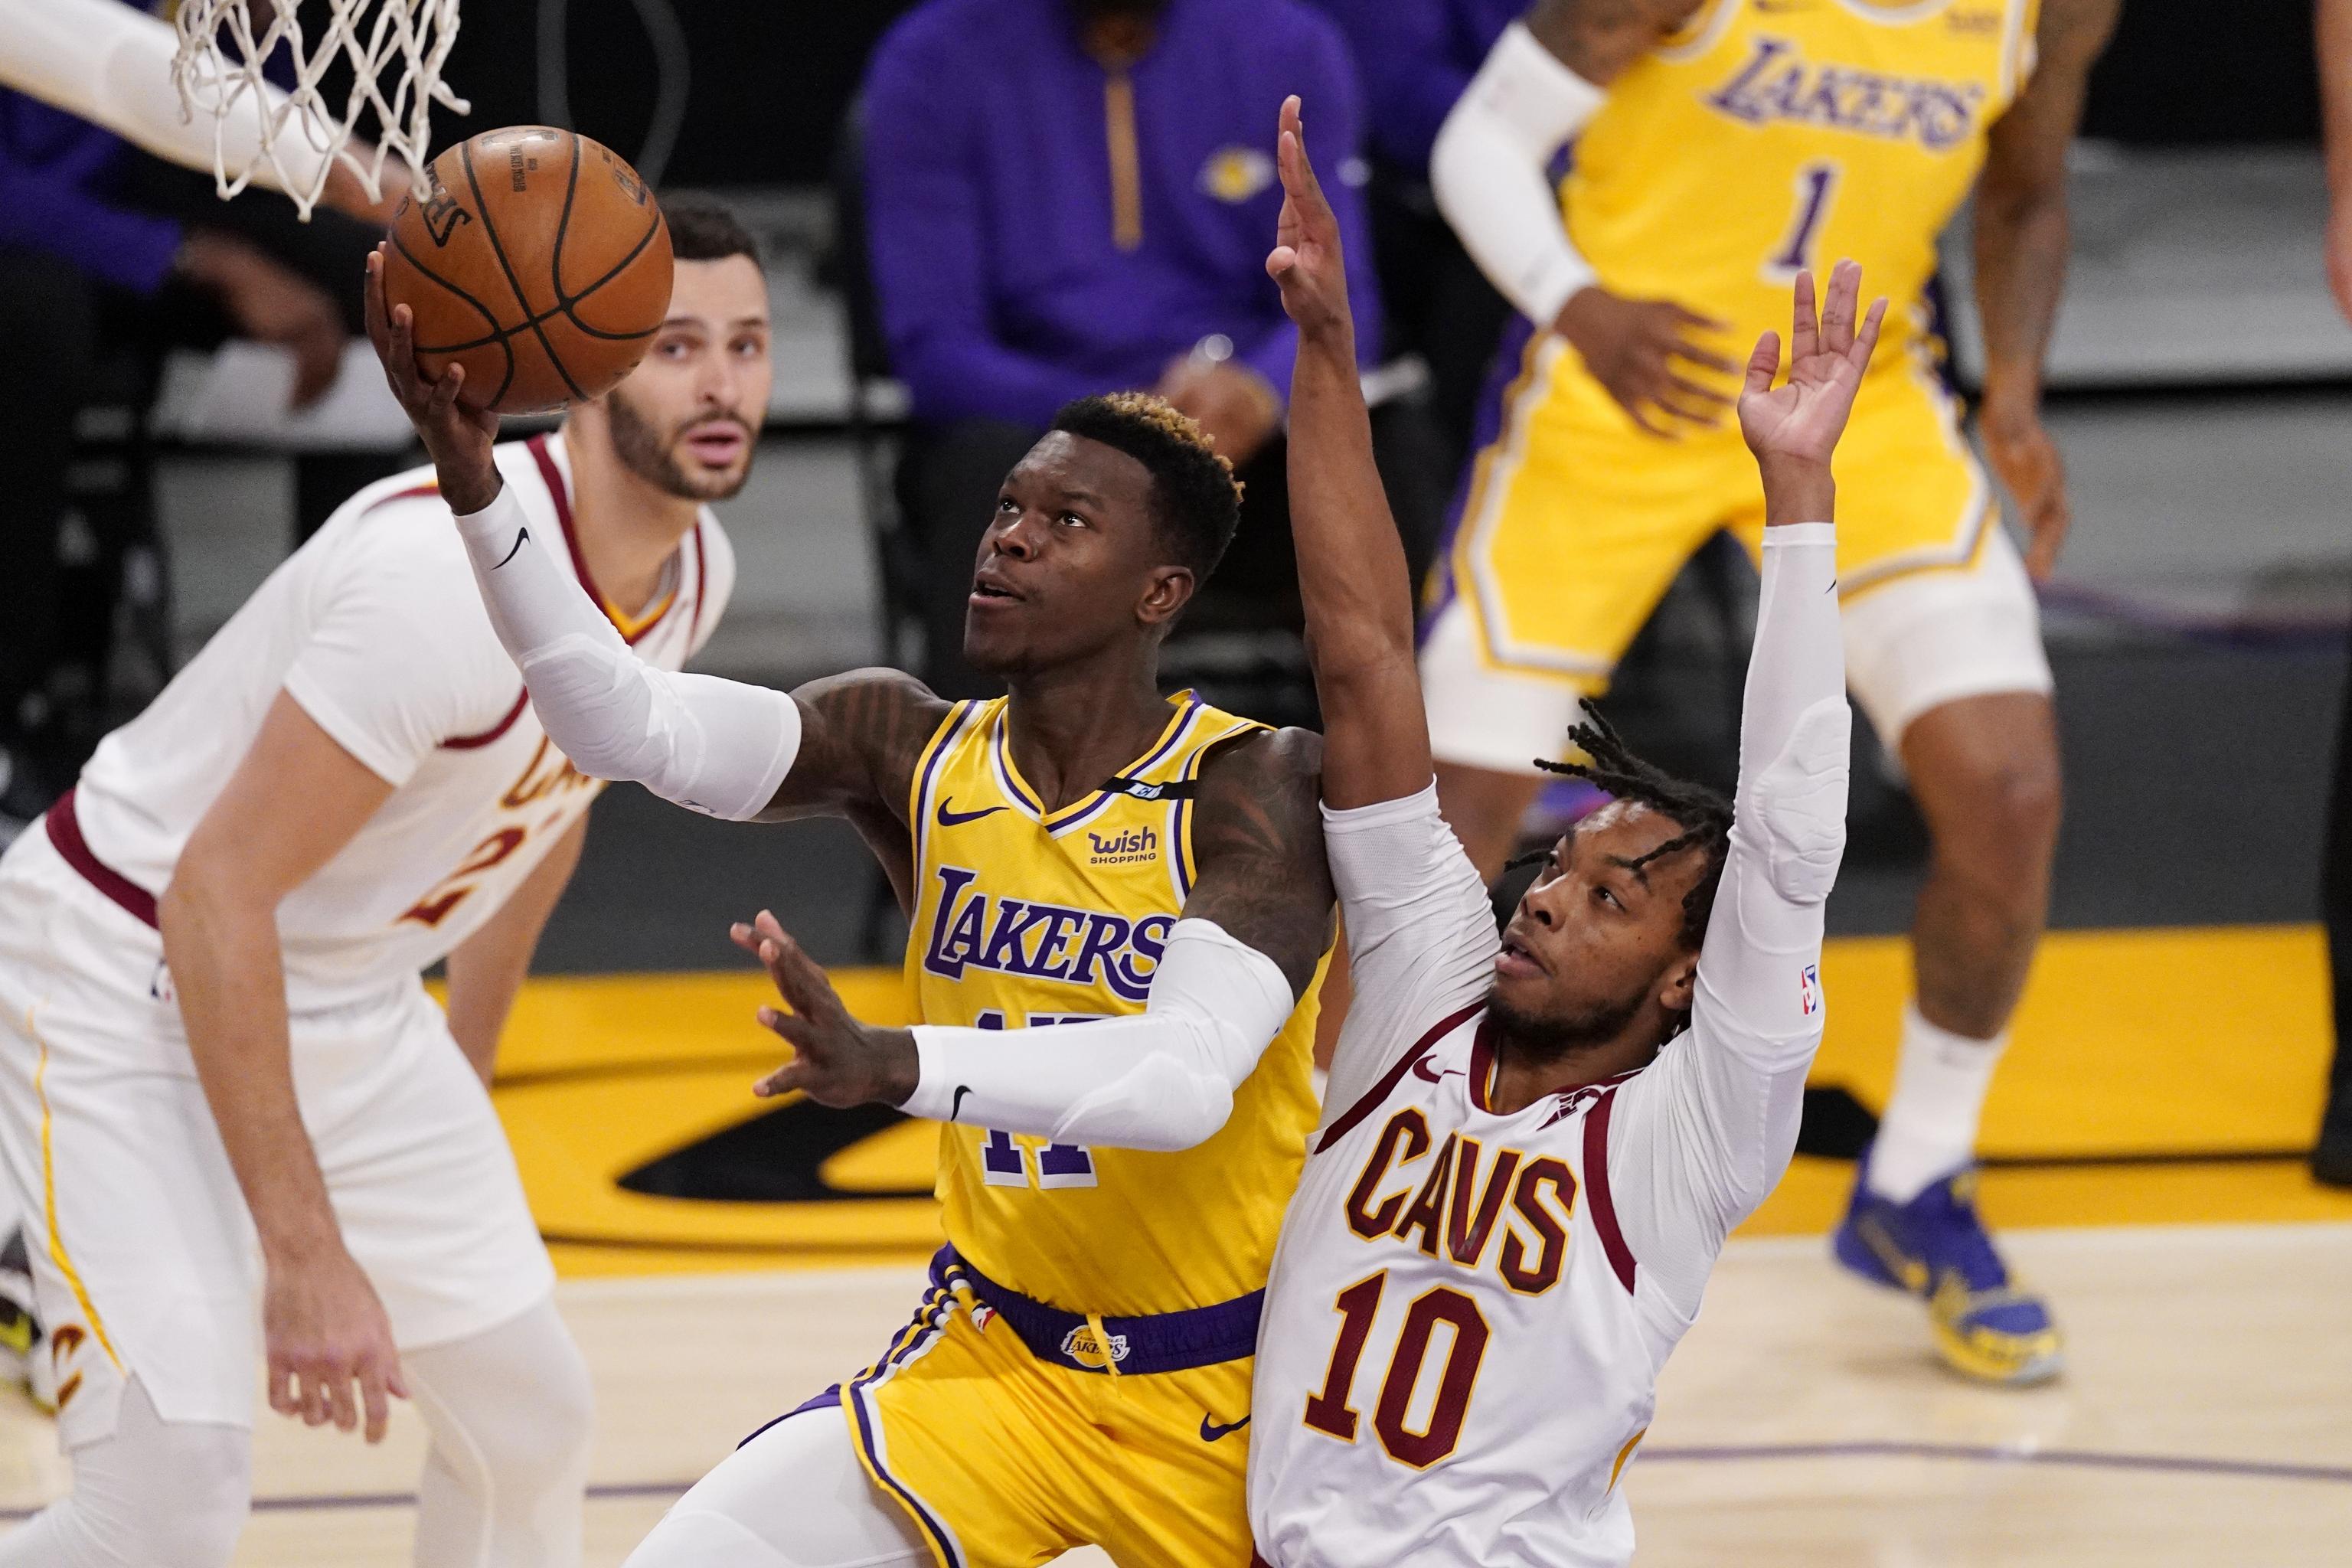 Dennis Schroder Lakers Pull Away From Cavs To Snap 4 Game Losing Streak Bleacher Report Latest News Videos And Highlights